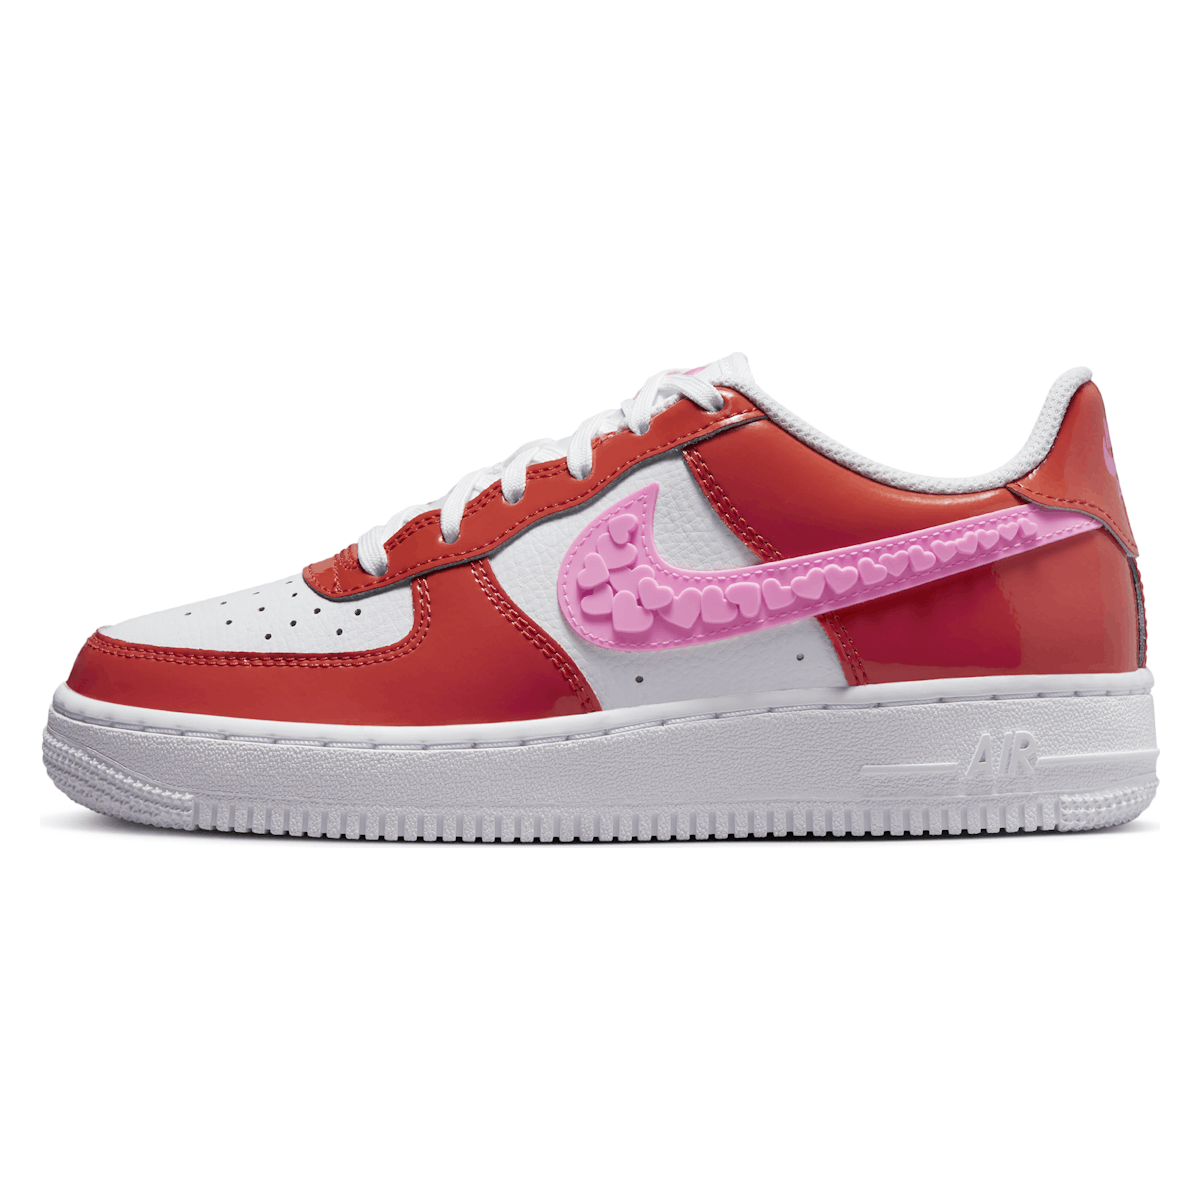 Nike Air Force 1 GS "Valentine’s Day"